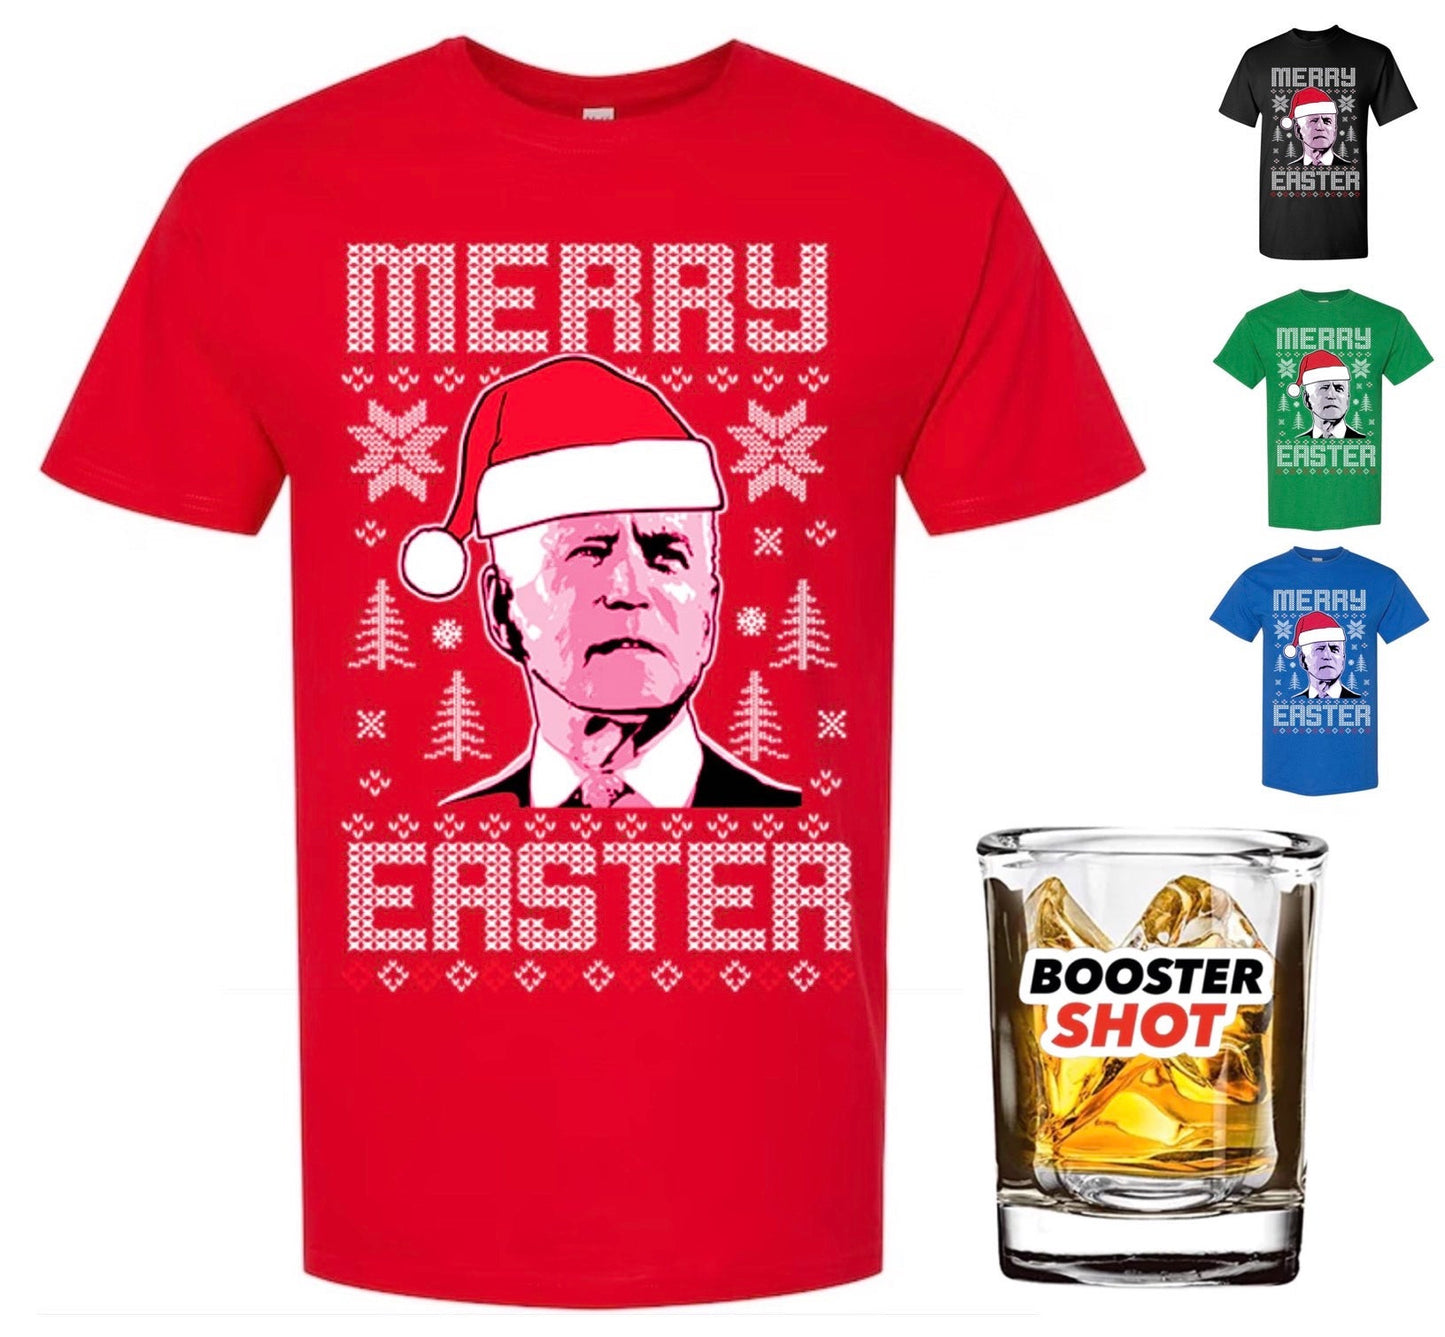 Merry Easter T-shirt (+Free Booster)